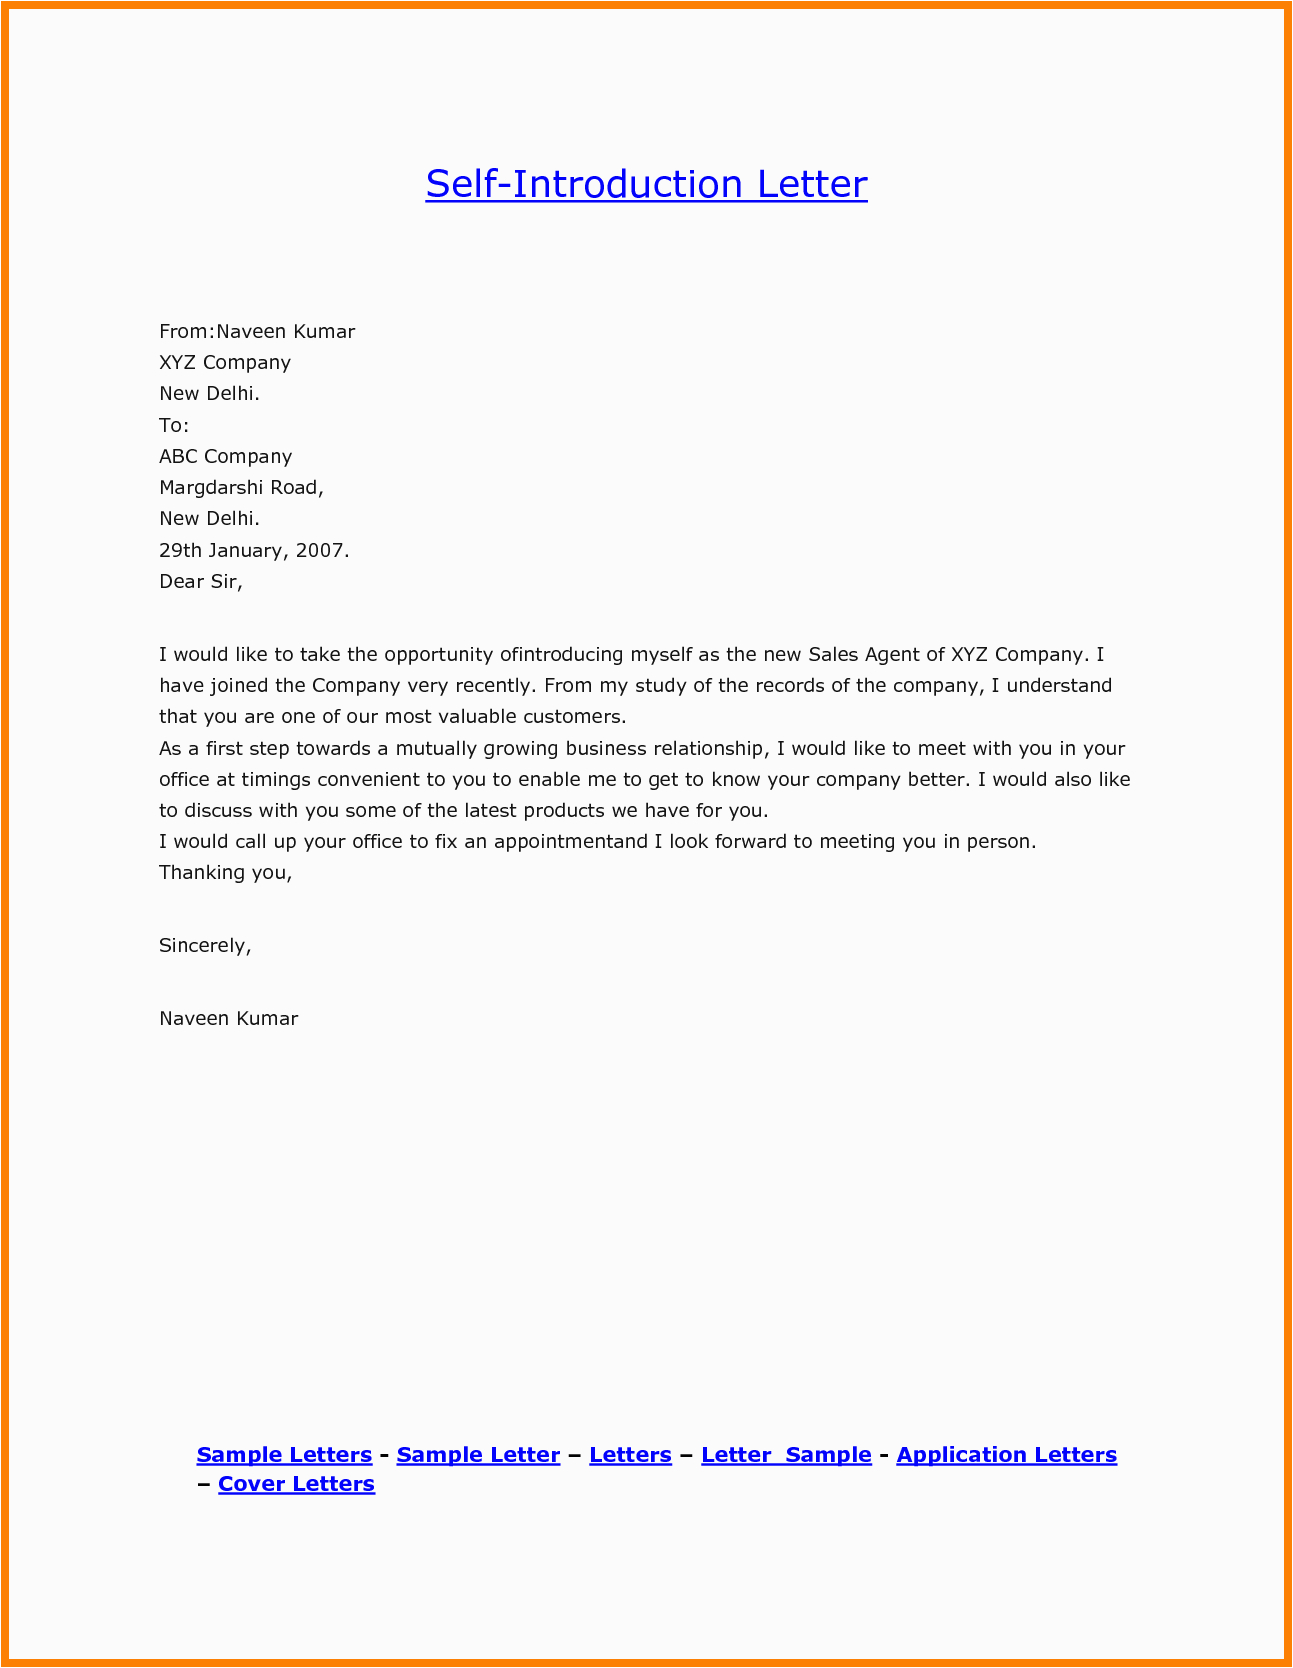 Sample Letter Introducing Yourself to Be with A Resume Image Result for Sample Letter Introducing Yourself